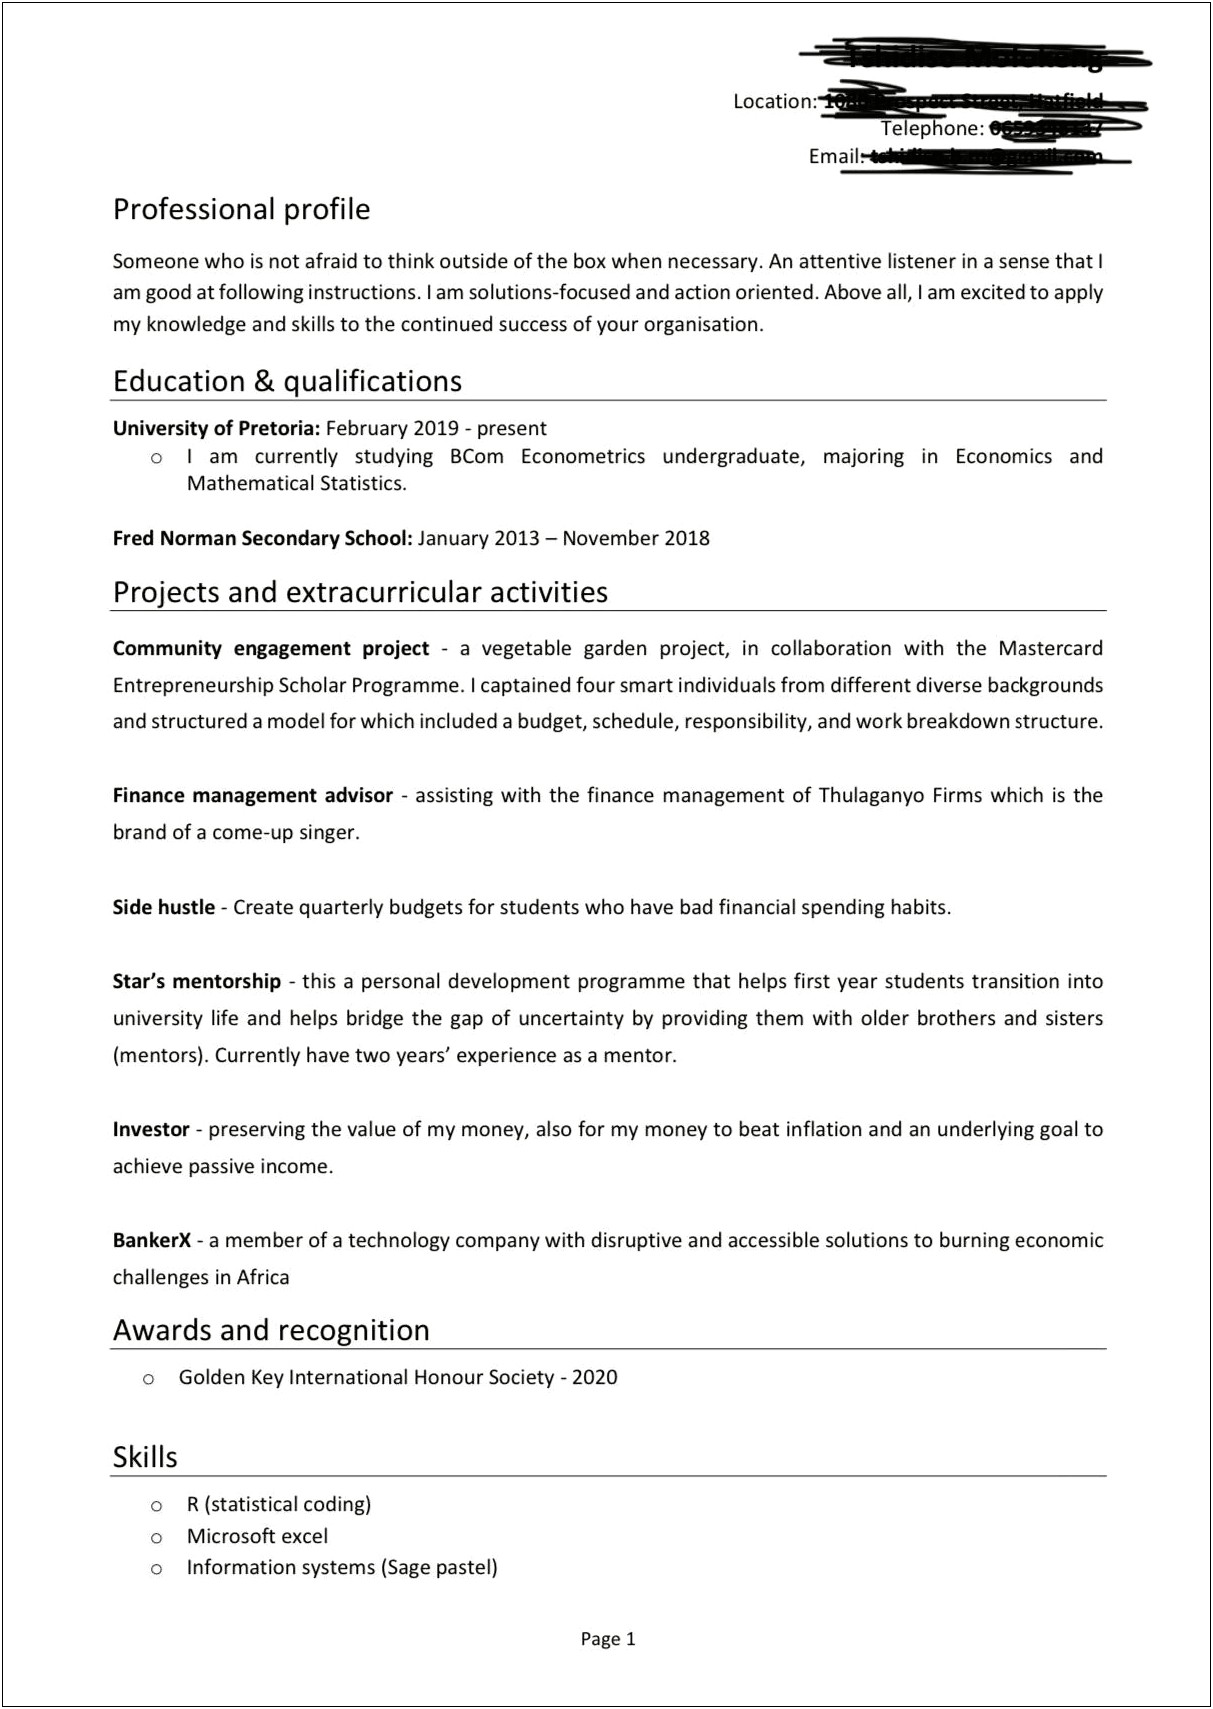 Can Work With People With Diverese Background Resume